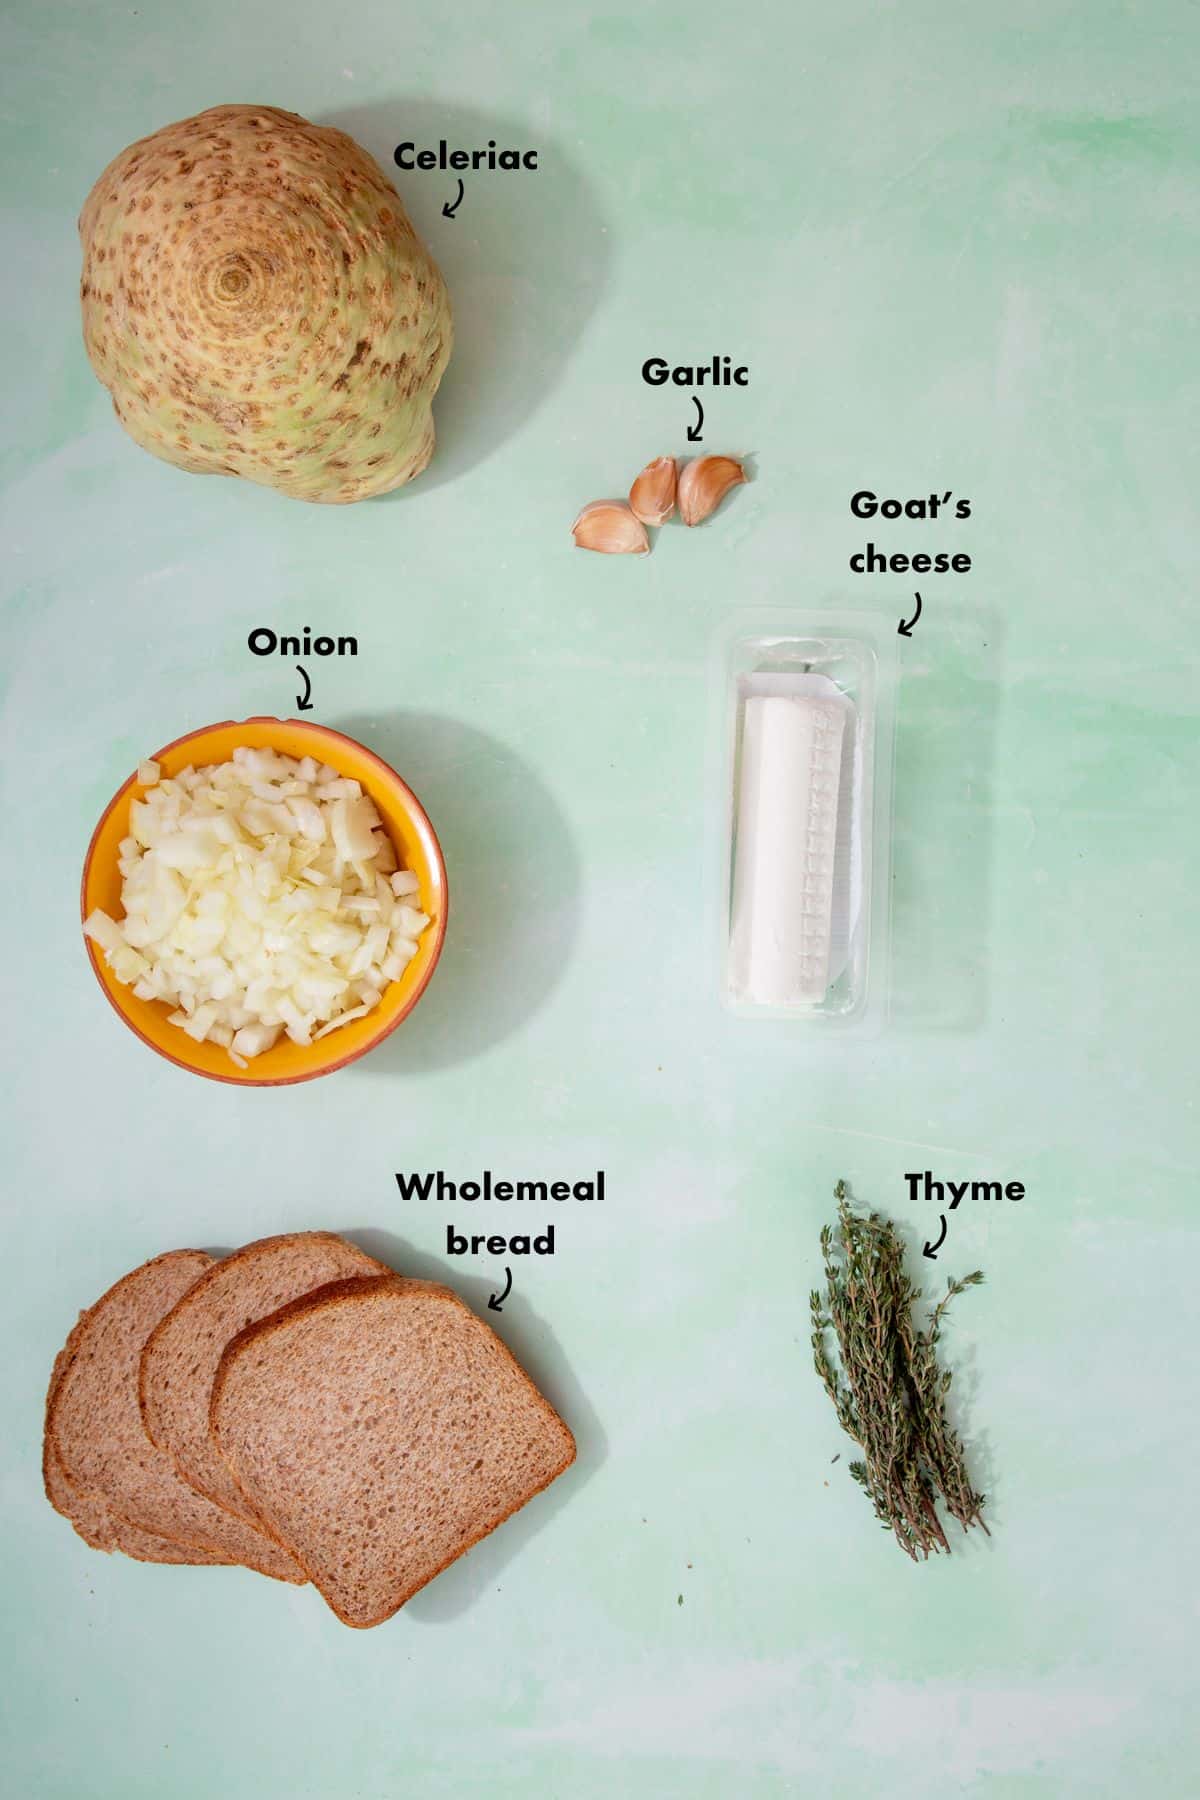 Ingredients to make celeriac soup, laid out on a pale blue background and labelled.